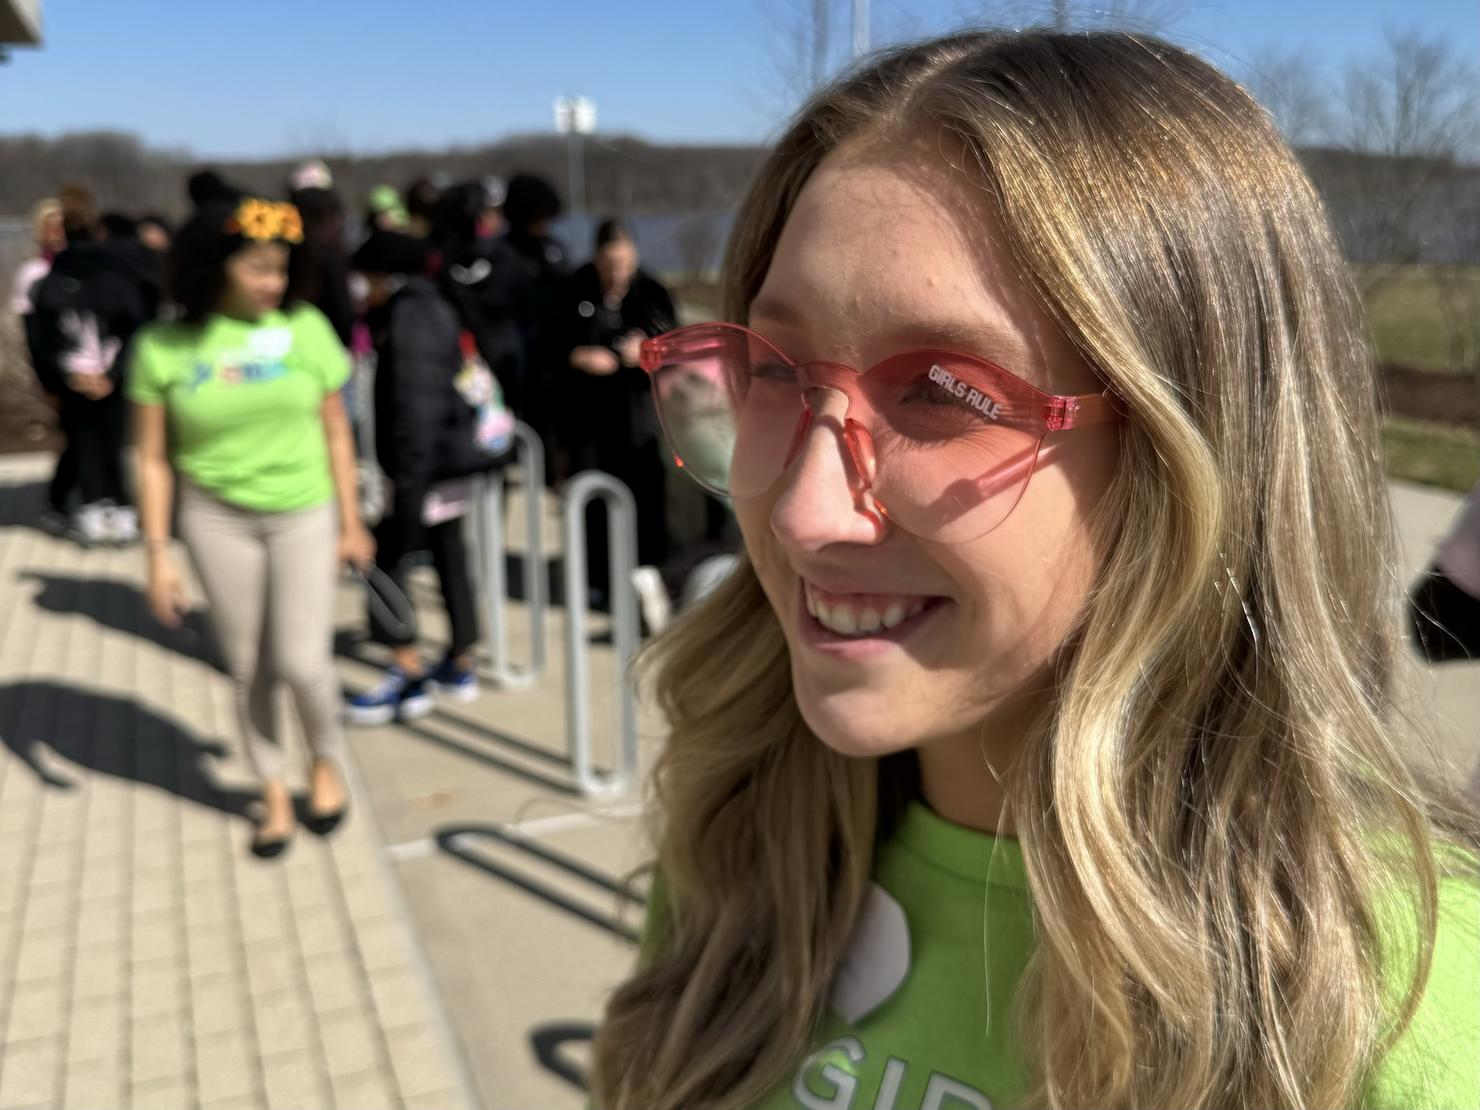 A staff member of Schneider Electric, one of the event sponsors, wears pink sunglasses that say "Girls Rule"